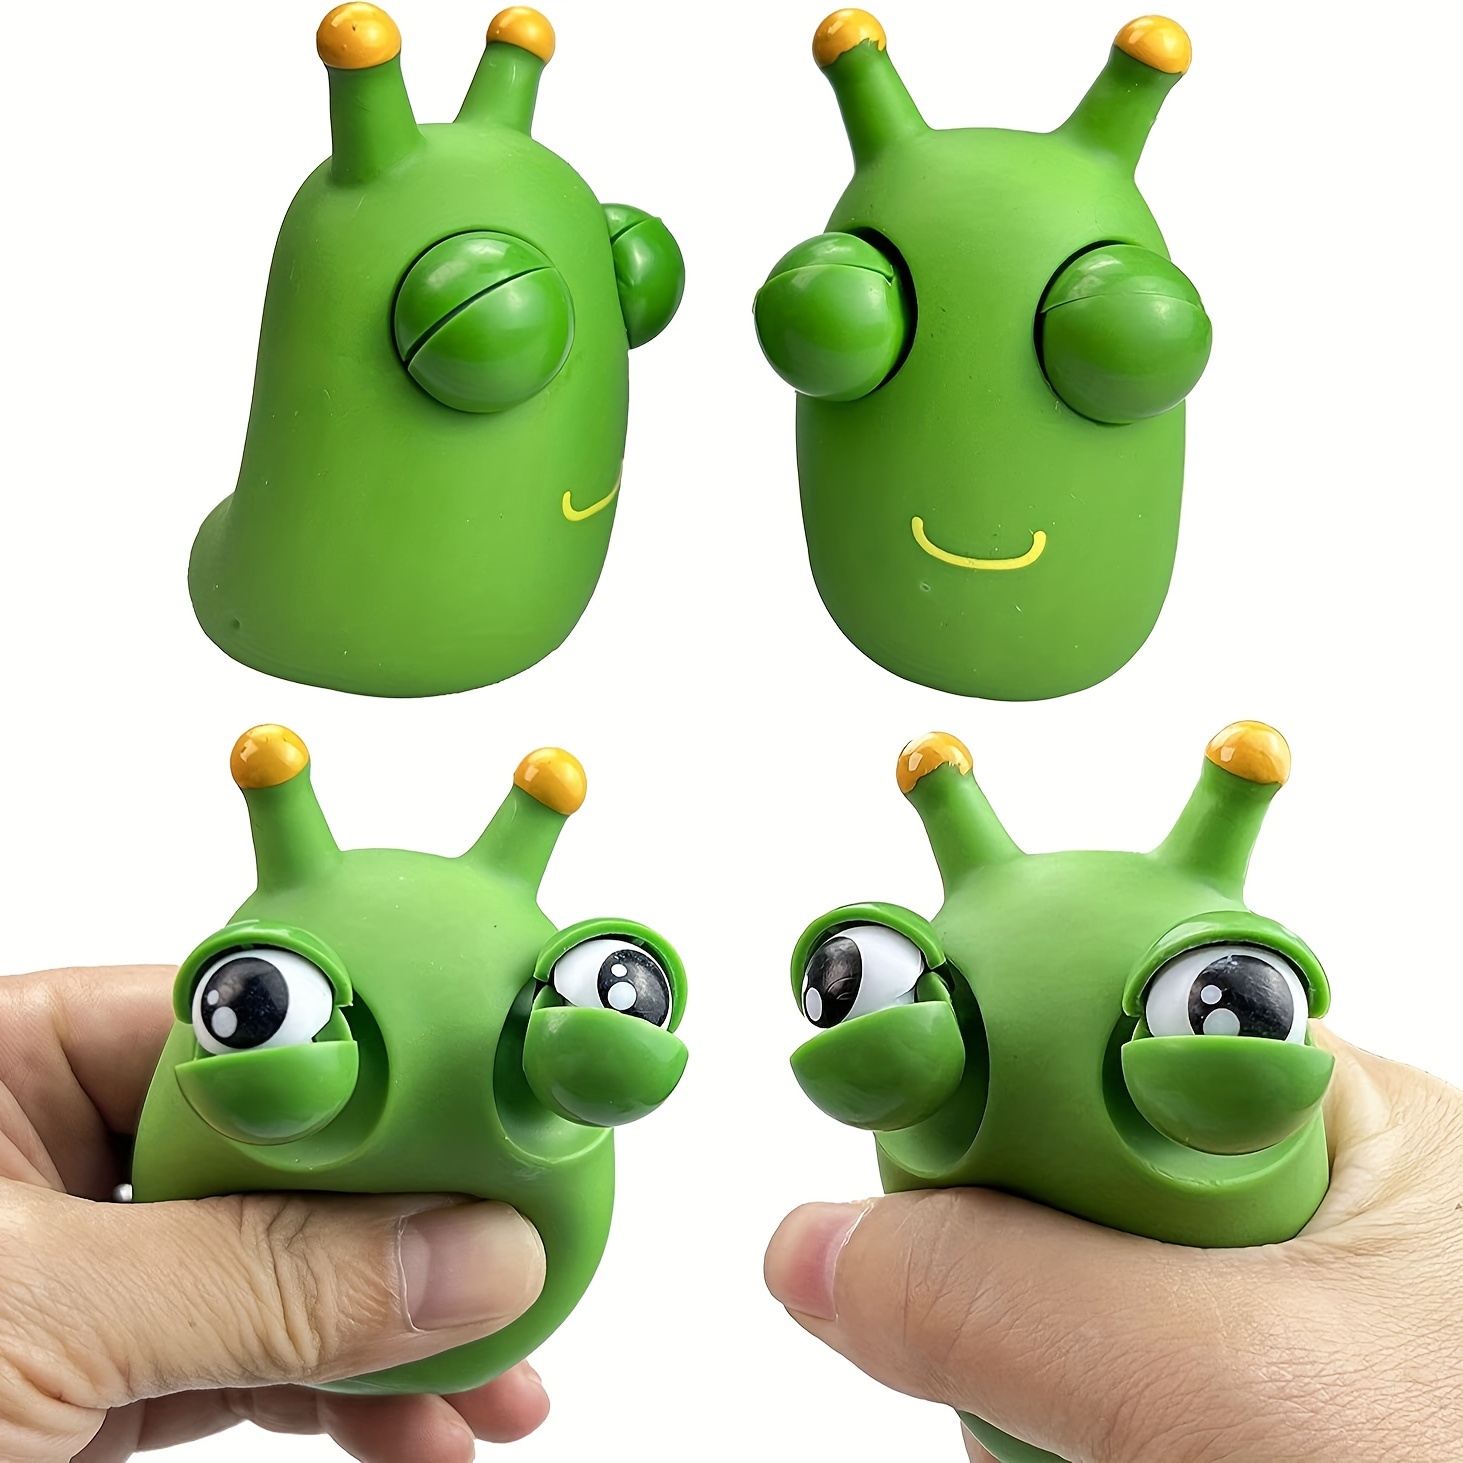 Squishy Eye-Popping Worm Squeeze Toy Stress Reliever Creative